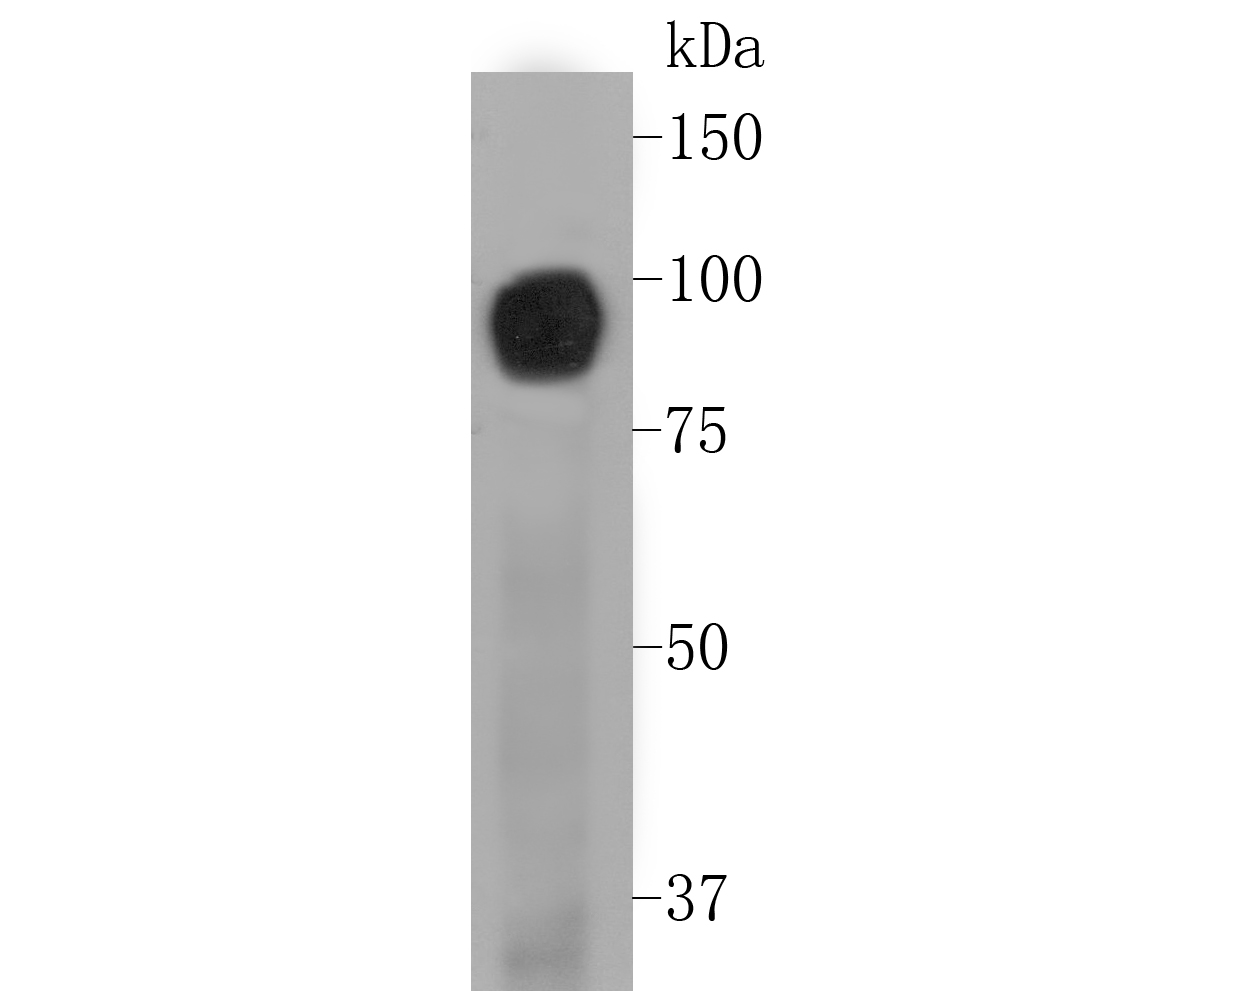 Western blot analysis of CD239 on A431 cell lysate. Proteins were transferred to a PVDF membrane and blocked with 5% BSA in PBS for 1 hour at room temperature. The primary antibody (ET7110-04, 1/500) was used in 5% BSA at room temperature for 2 hours. Goat Anti-Rabbit IgG - HRP Secondary Antibody (HA1001) at 1:5,000 dilution was used for 1 hour at room temperature.